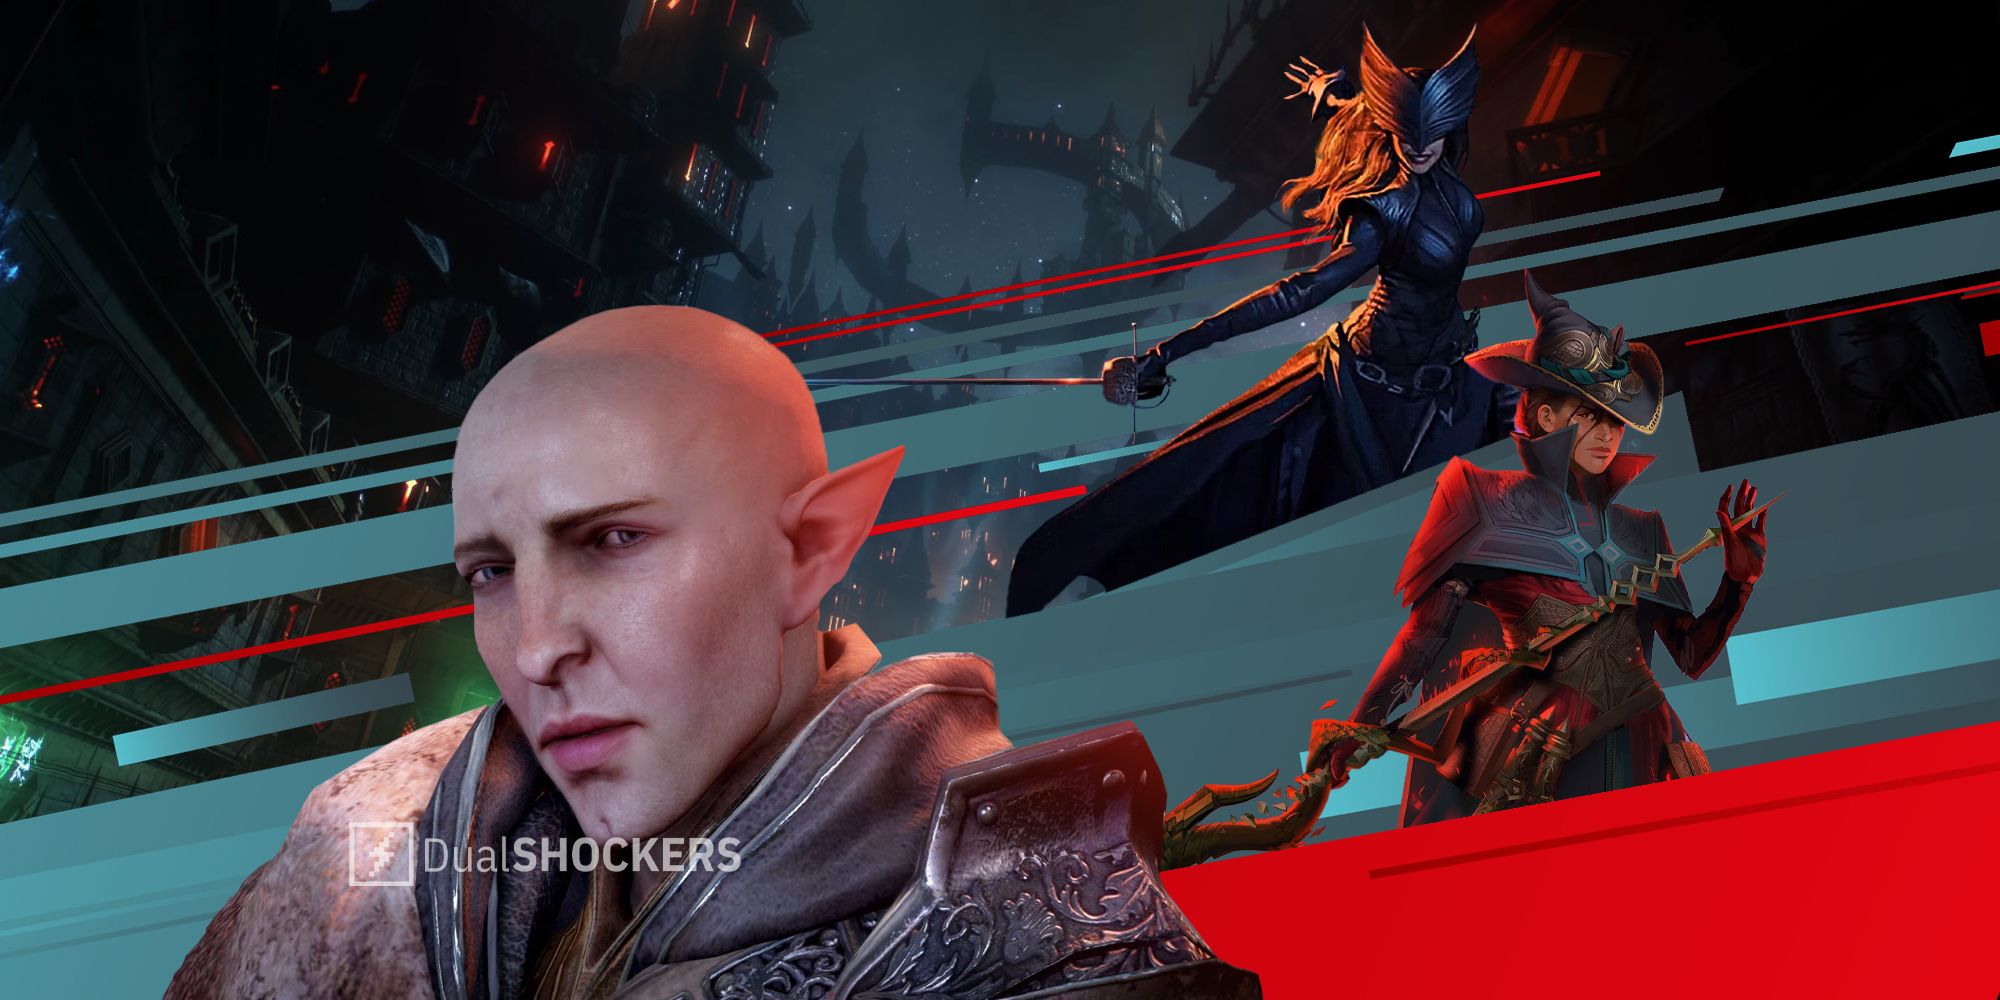 Laid-off Dragon Age: Dreadwolf and Mass Effect devs mark N7 Day by